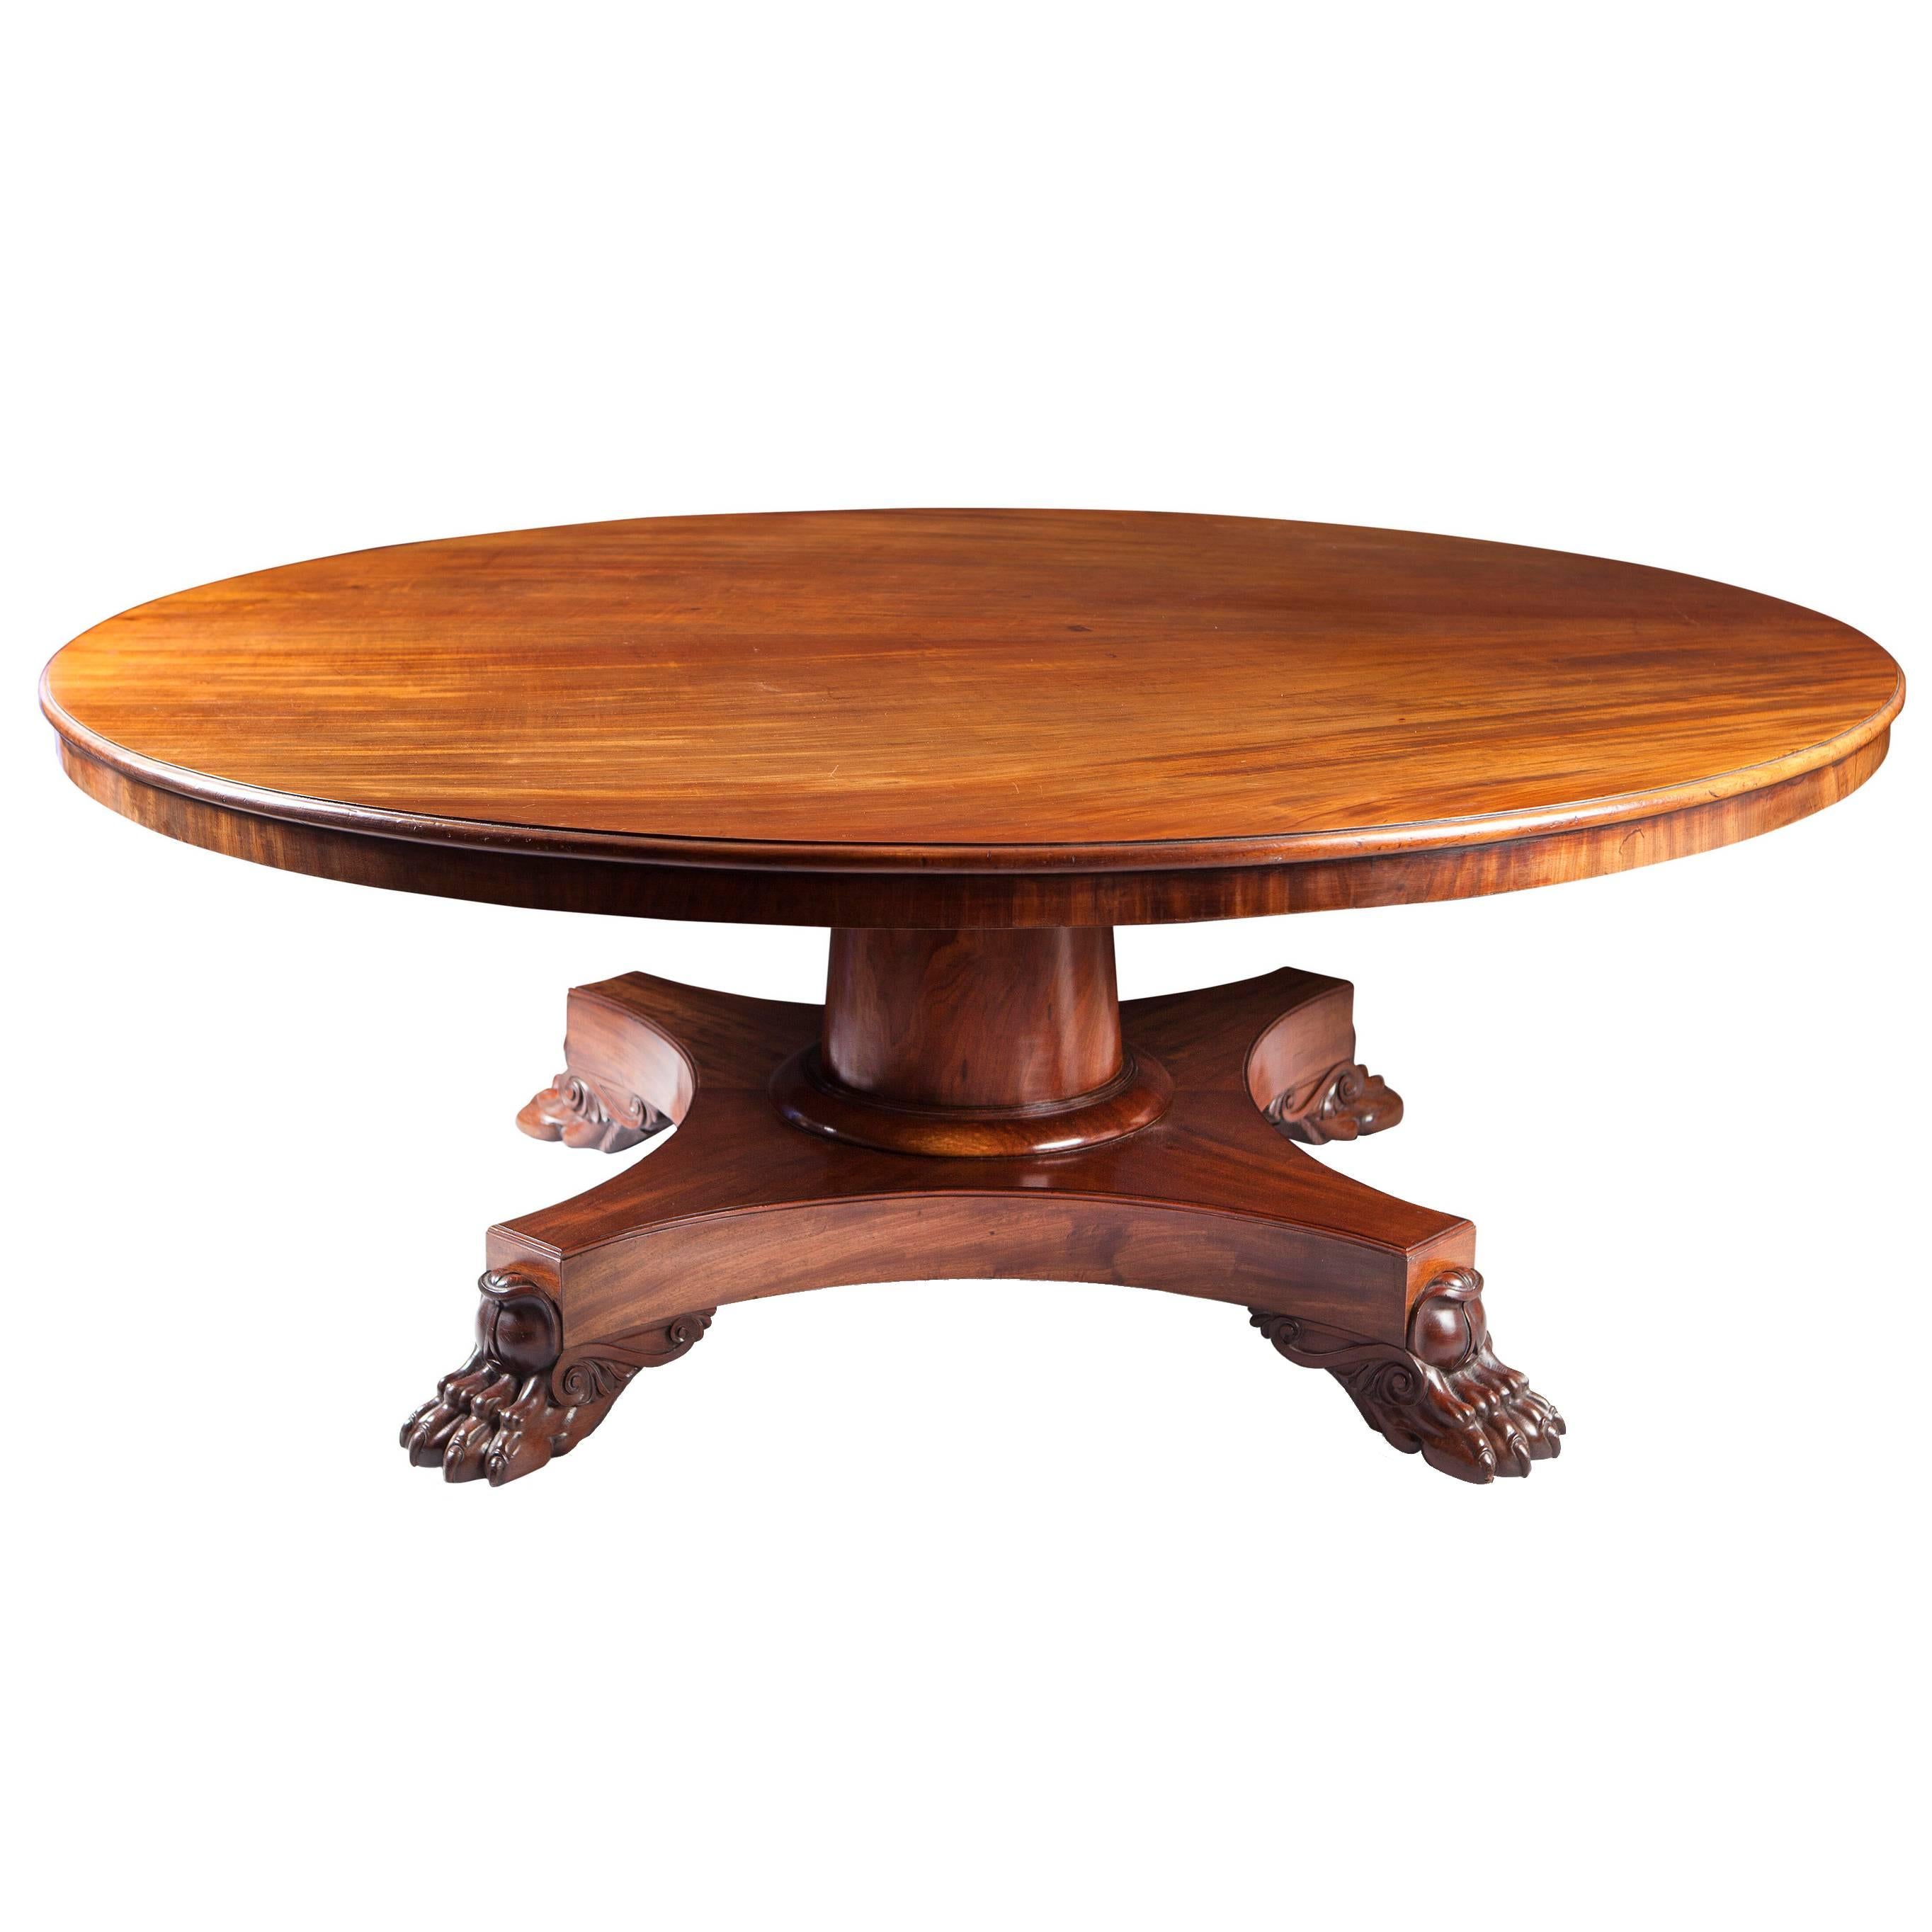 6ft Regency Mahogany Round Pedestal Dining Table For Sale